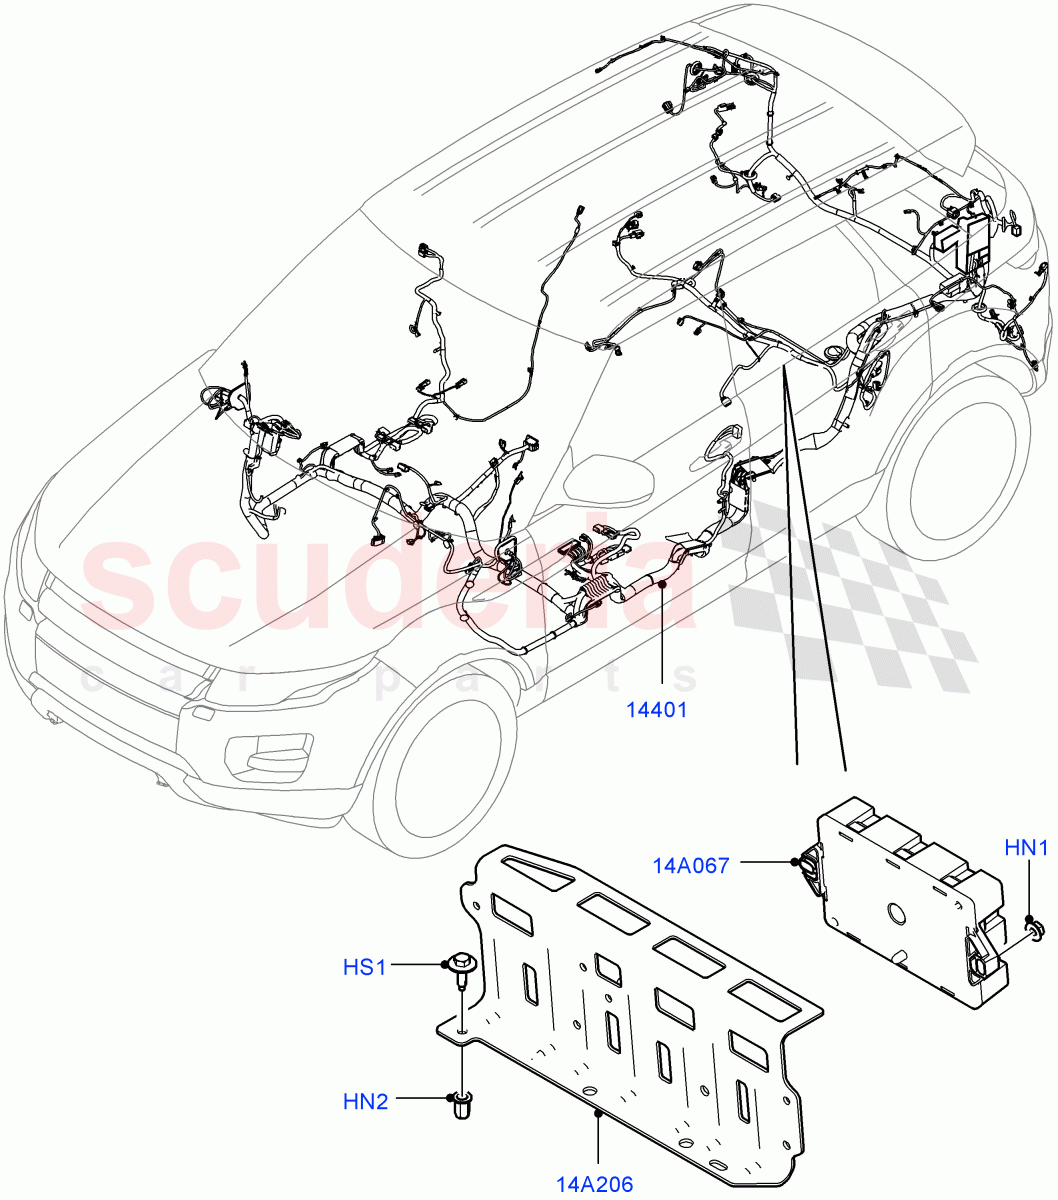 Electrical Wiring - Engine And Dash(Main Harness)(Changsu (China))((V)FROMEG000001) of Land Rover Land Rover Range Rover Evoque (2012-2018) [2.0 Turbo Diesel]